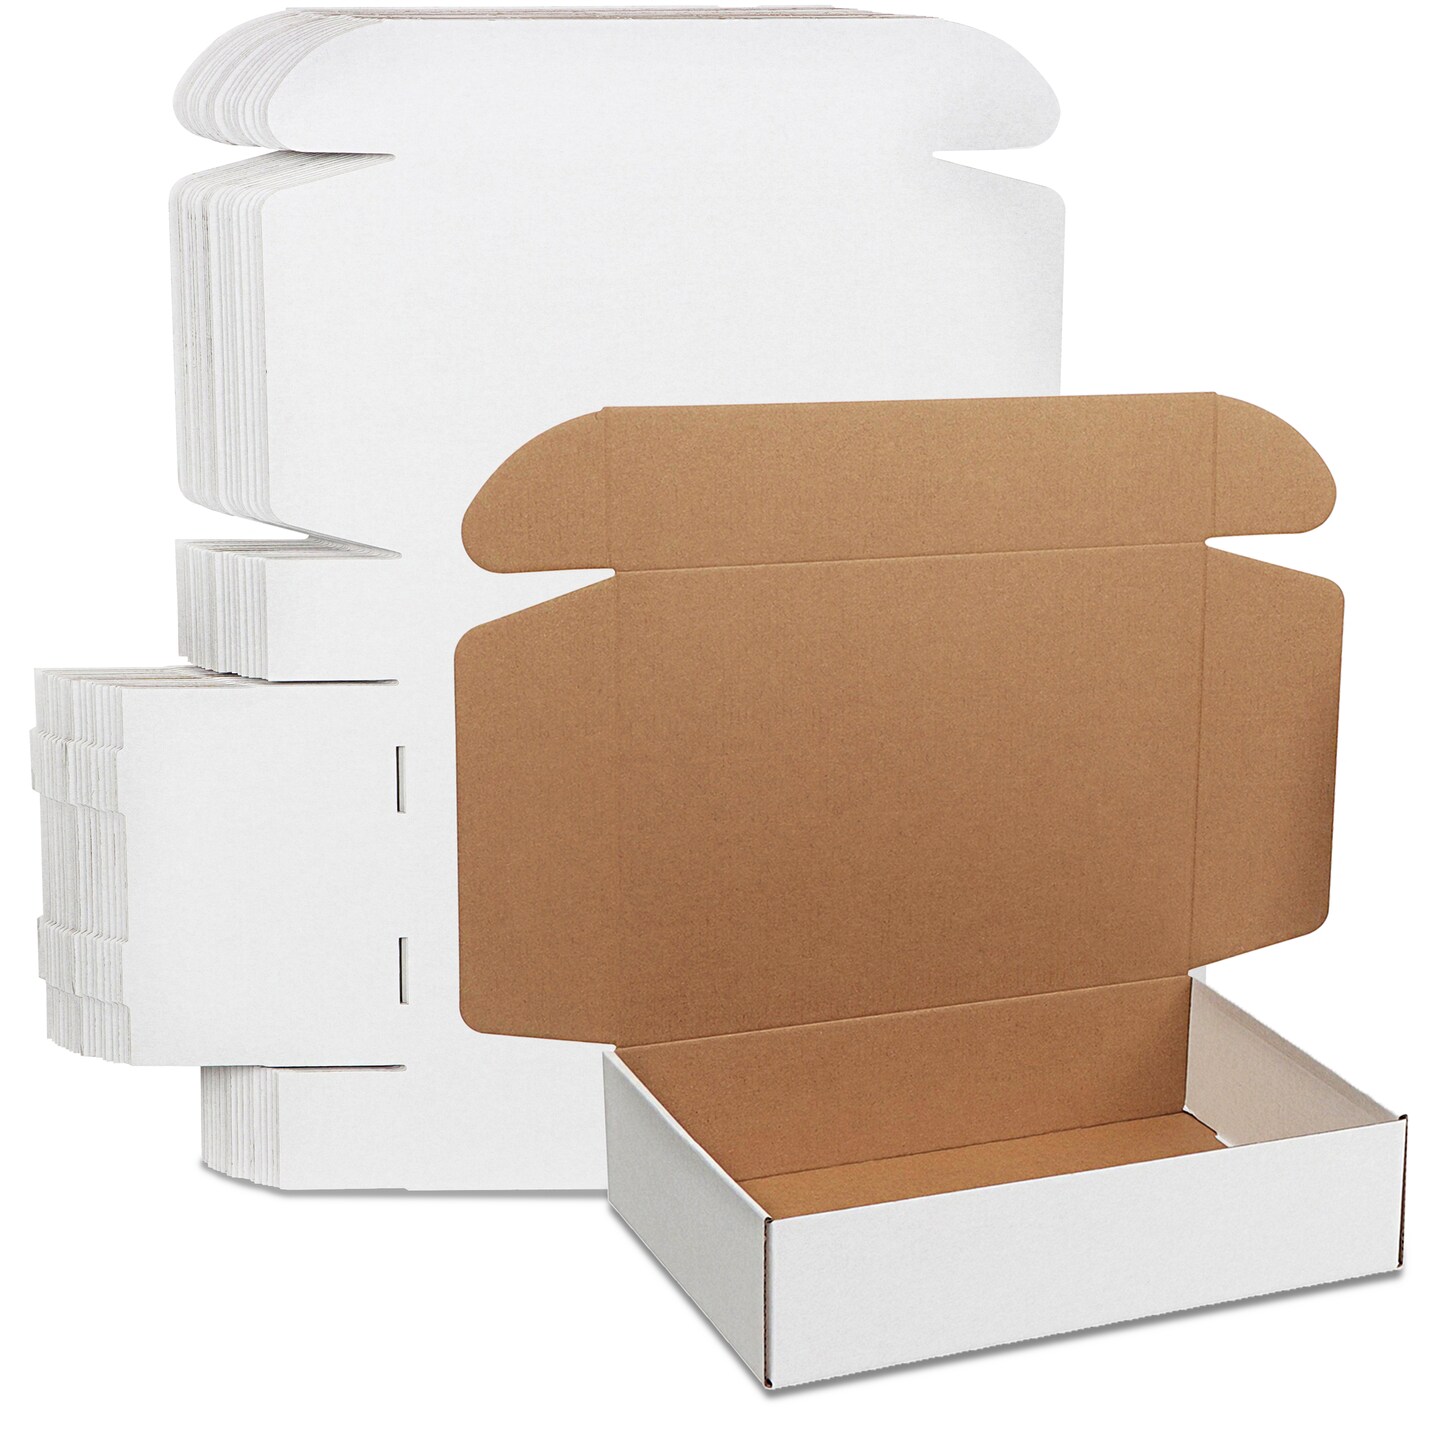 Lot45 White Shipping Boxes for Small Business - White Corrugated Box